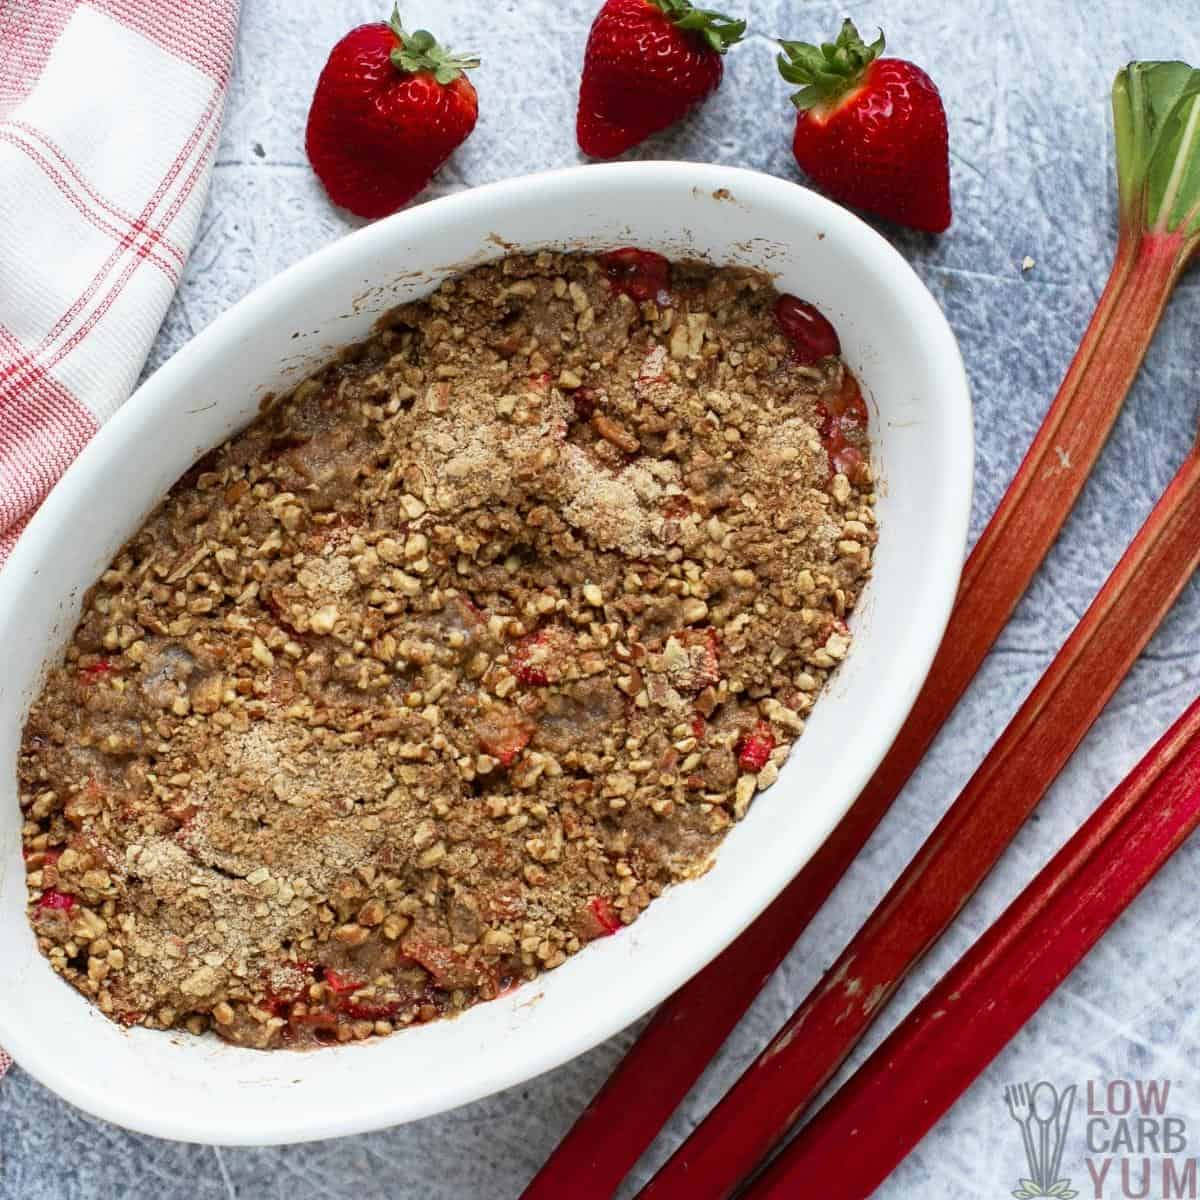 baked gluten-free keto strawberry rhubarb crips in oval dish.